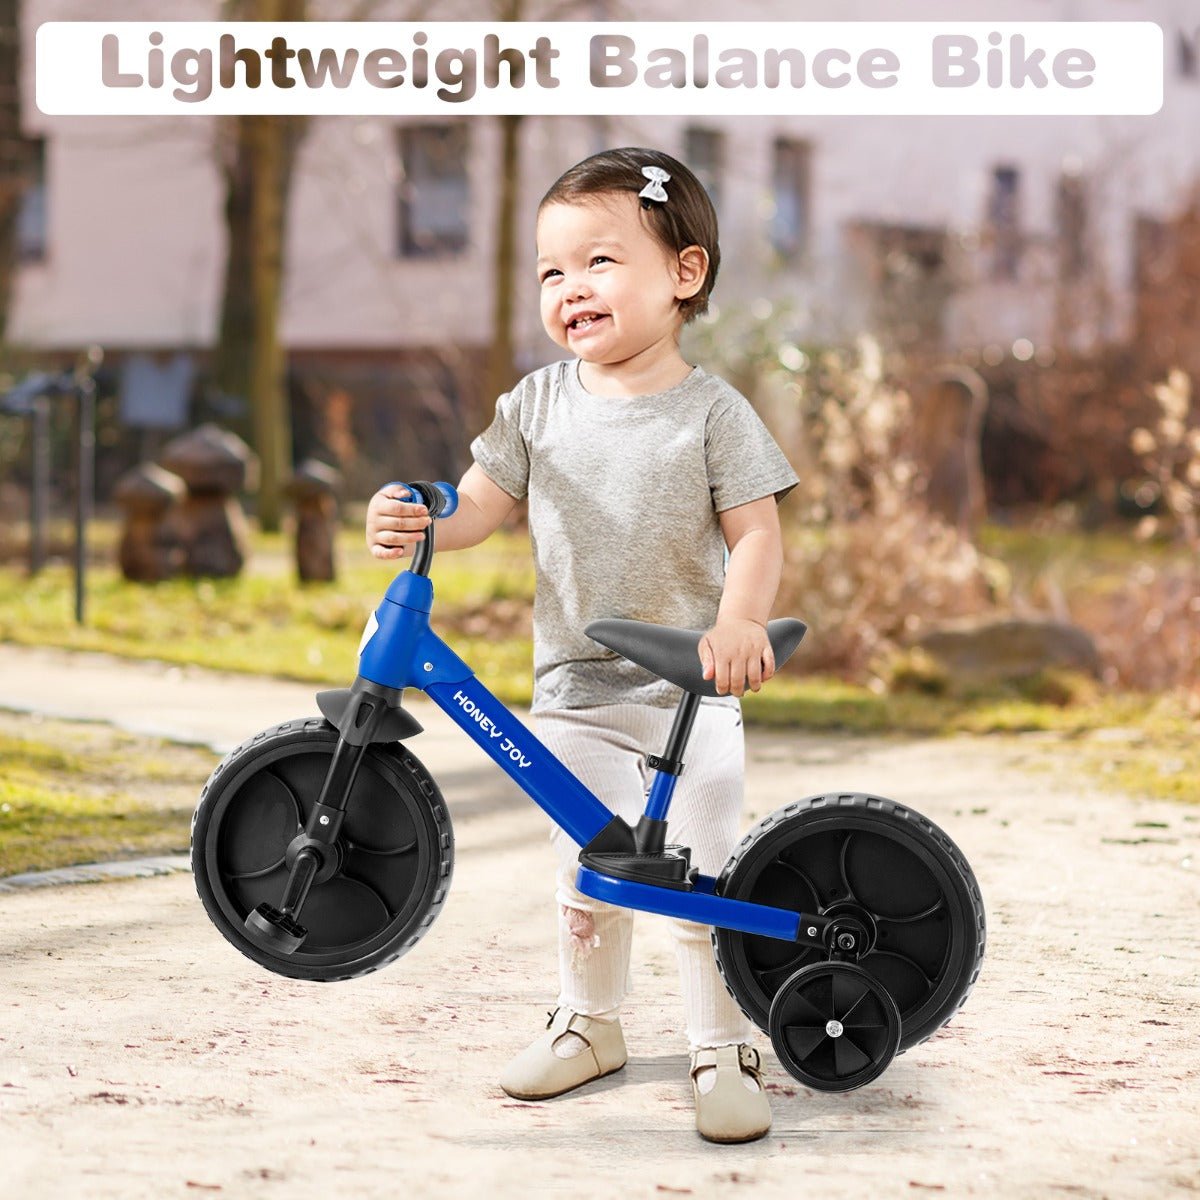 Wheels of Freedom: 4-in-1 Kids Training Bike for Thrilling Adventures